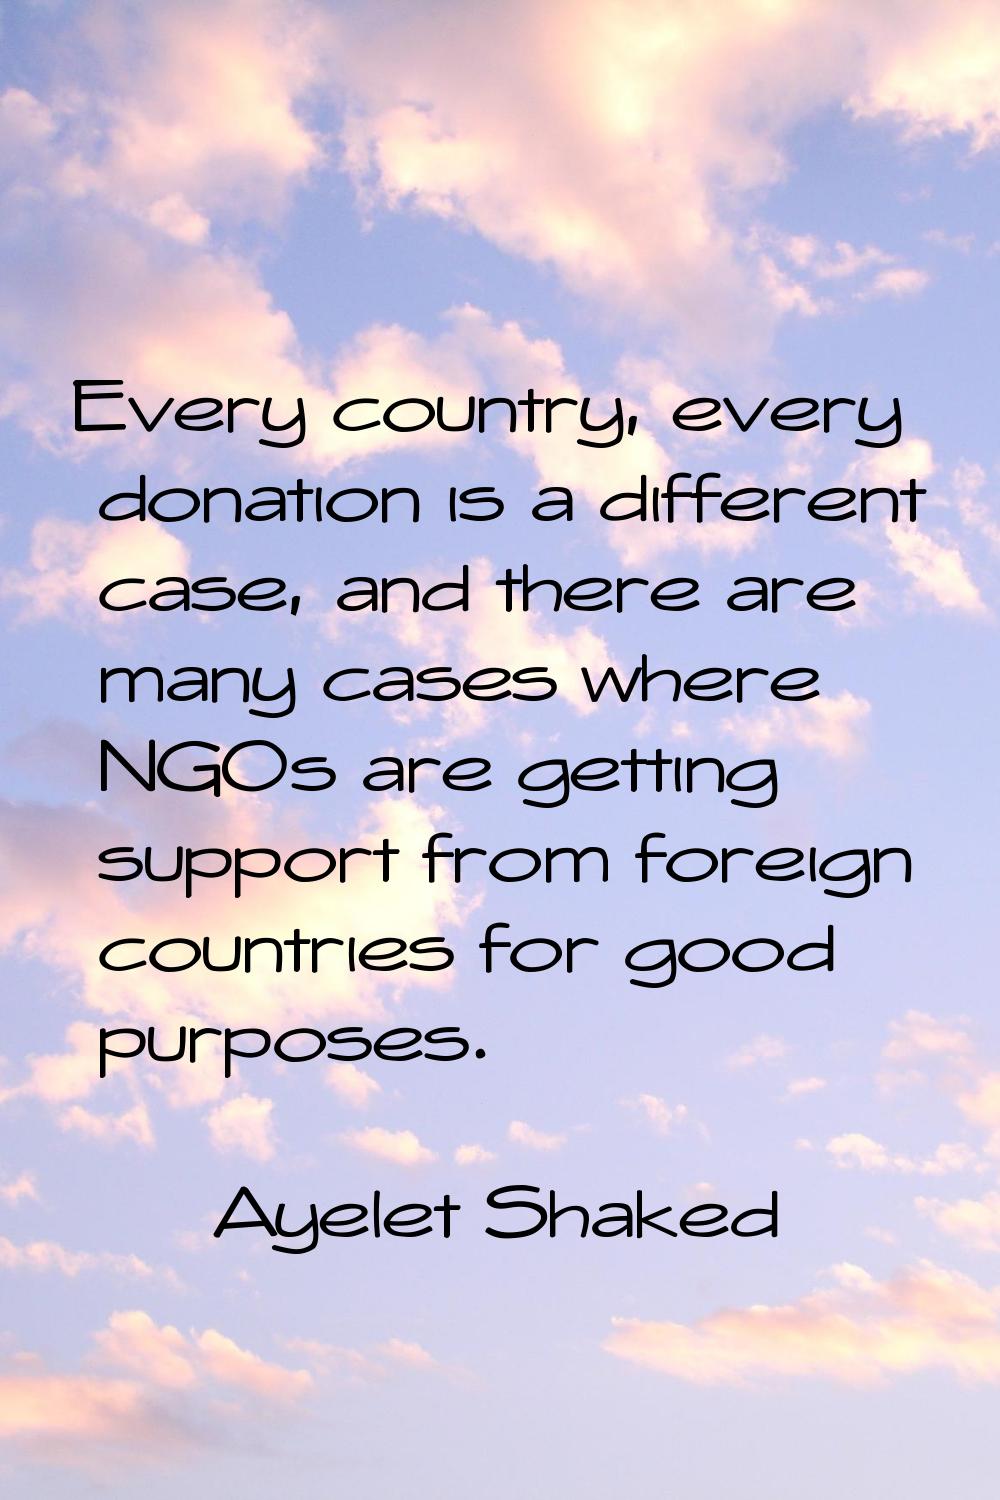 Every country, every donation is a different case, and there are many cases where NGOs are getting 